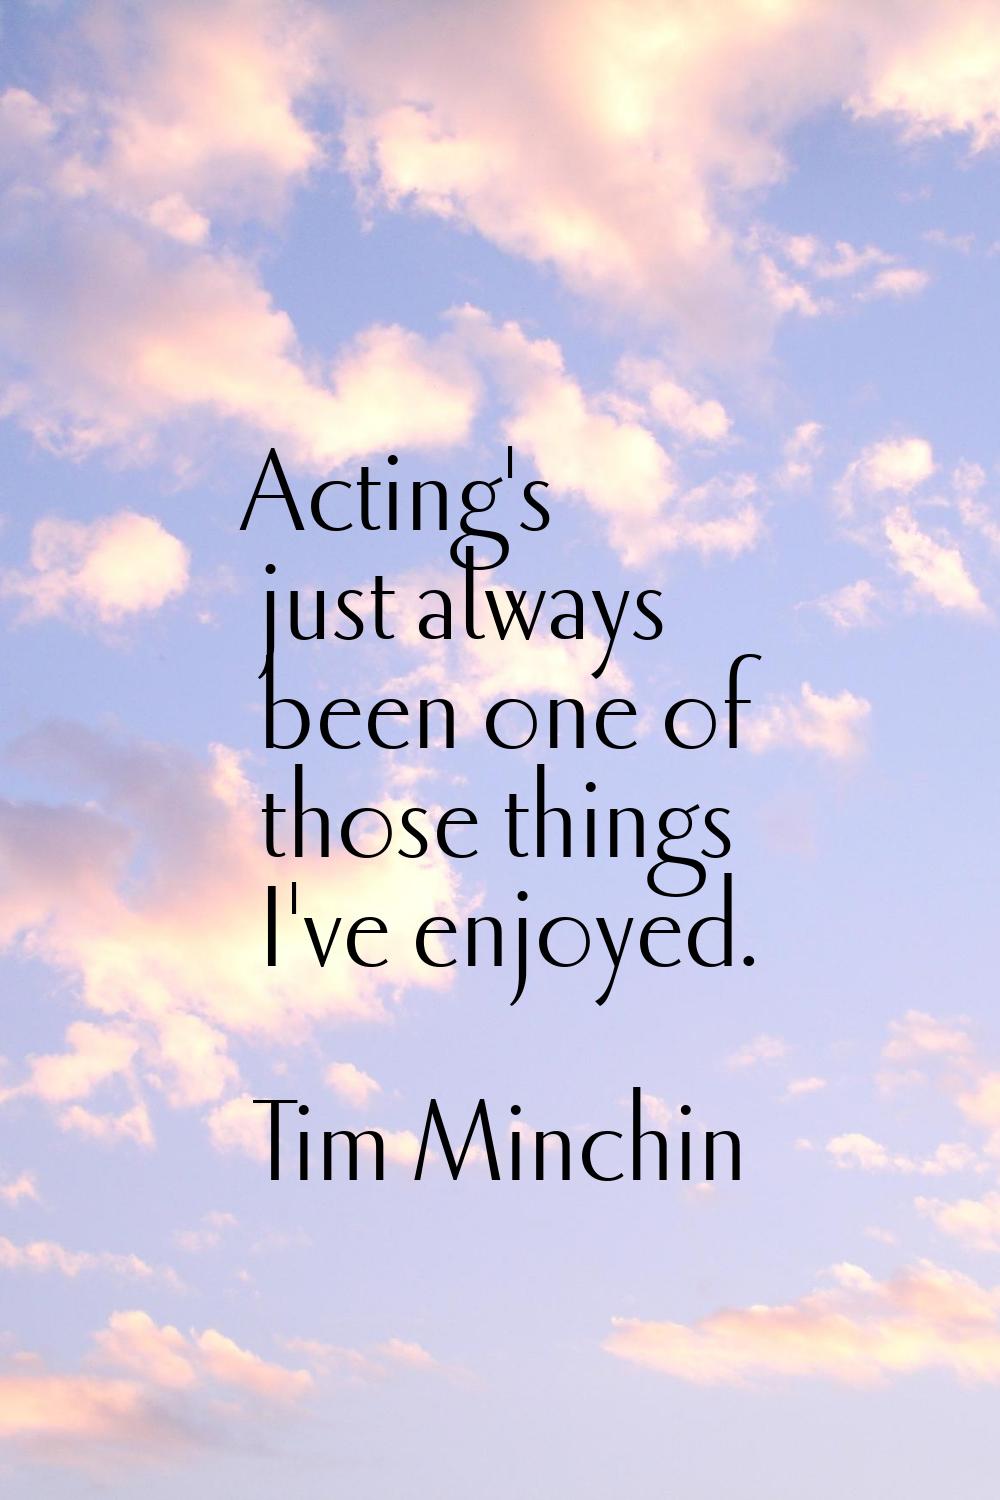 Acting's just always been one of those things I've enjoyed.